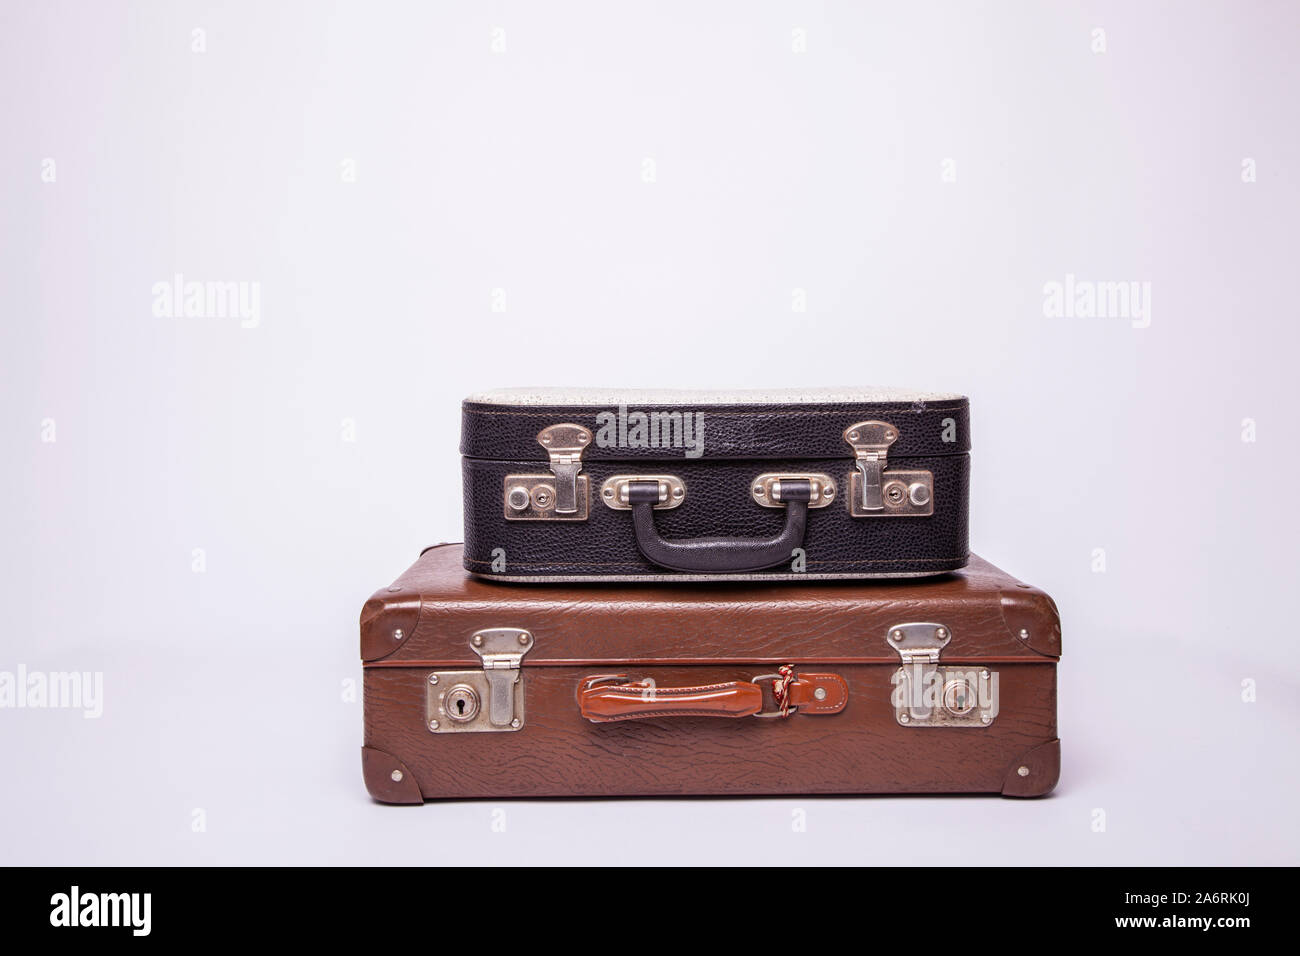 Old, retro, suitcases lie on the table with white background. Obsolete suitcase isolated on white background Stock Photo